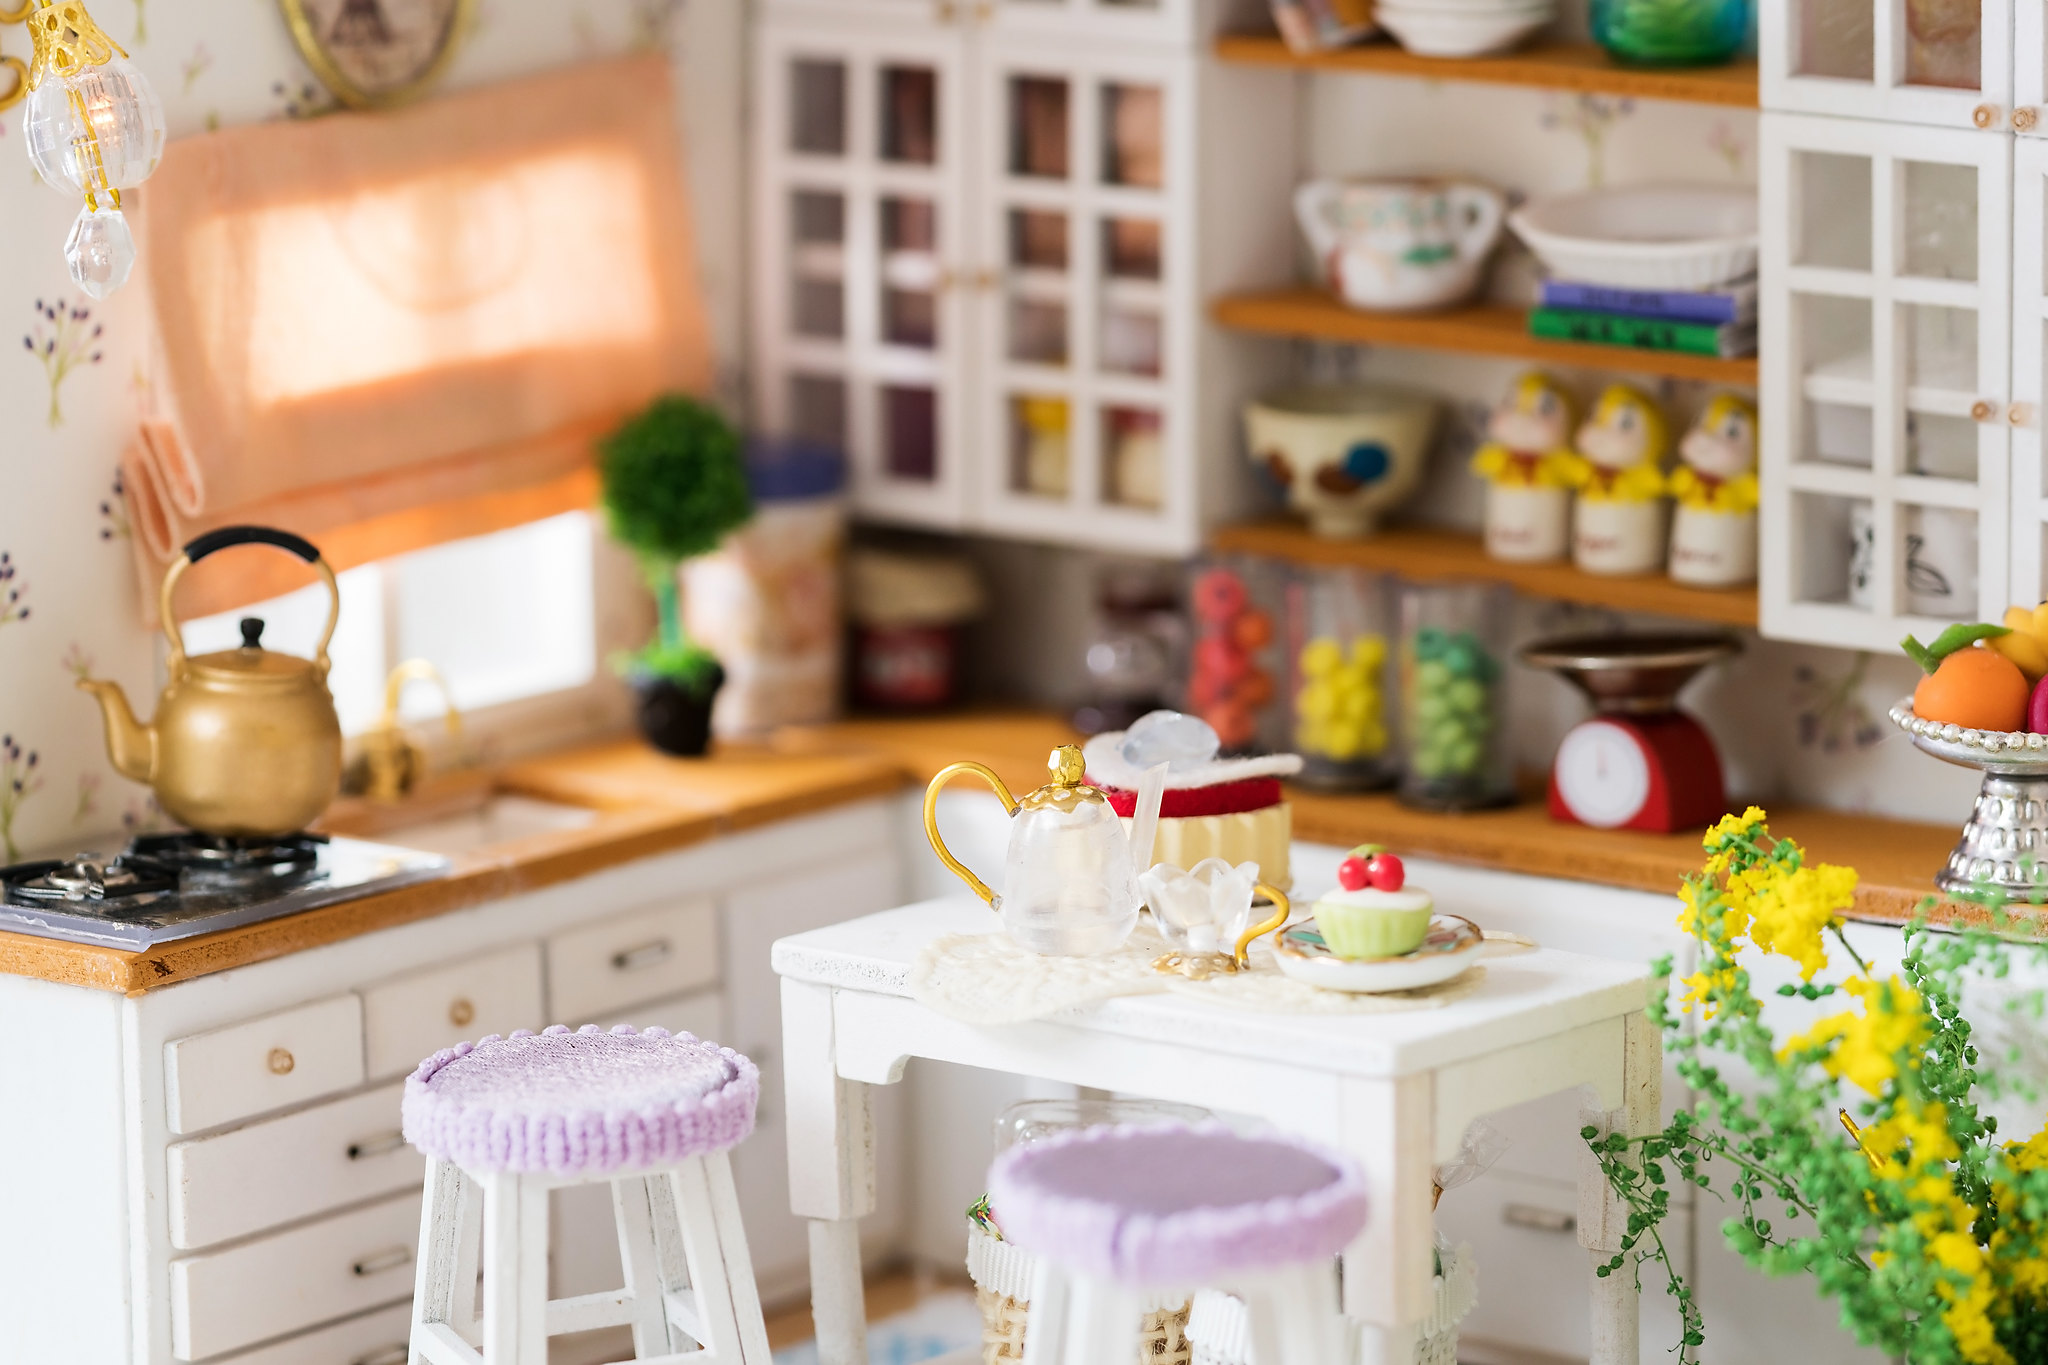 DIY Miniature Kitchen Room for Dollhouse